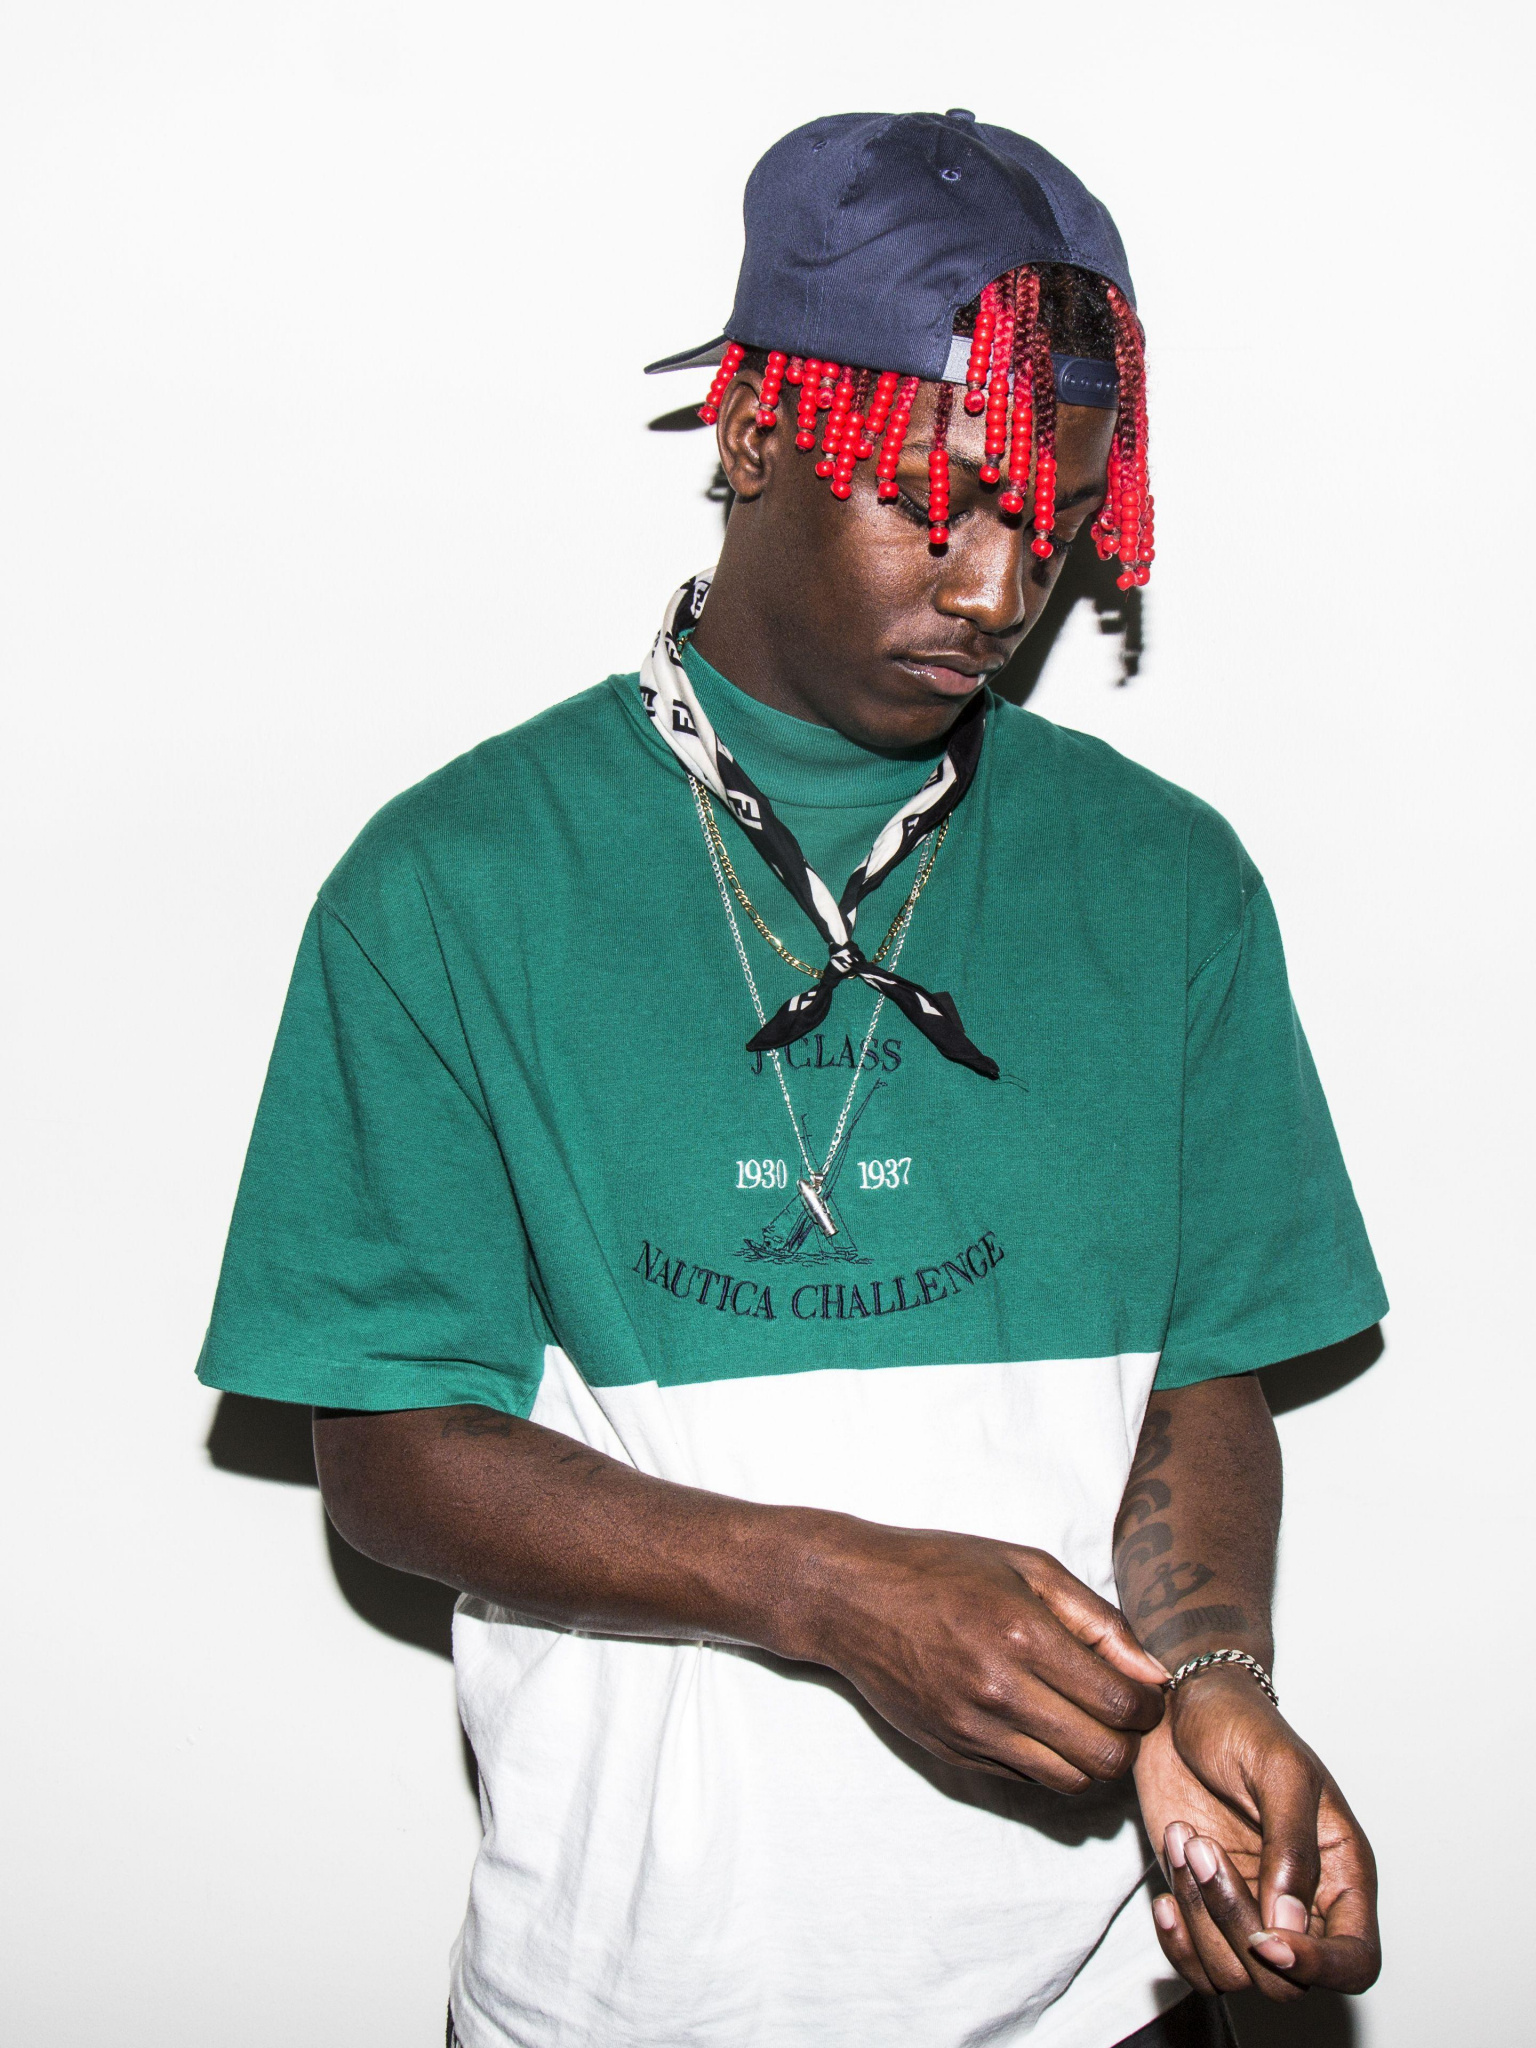 Lil Yachty, Free download, 2018 wallpapers, Lil Boat 2, 1540x2050 HD Handy